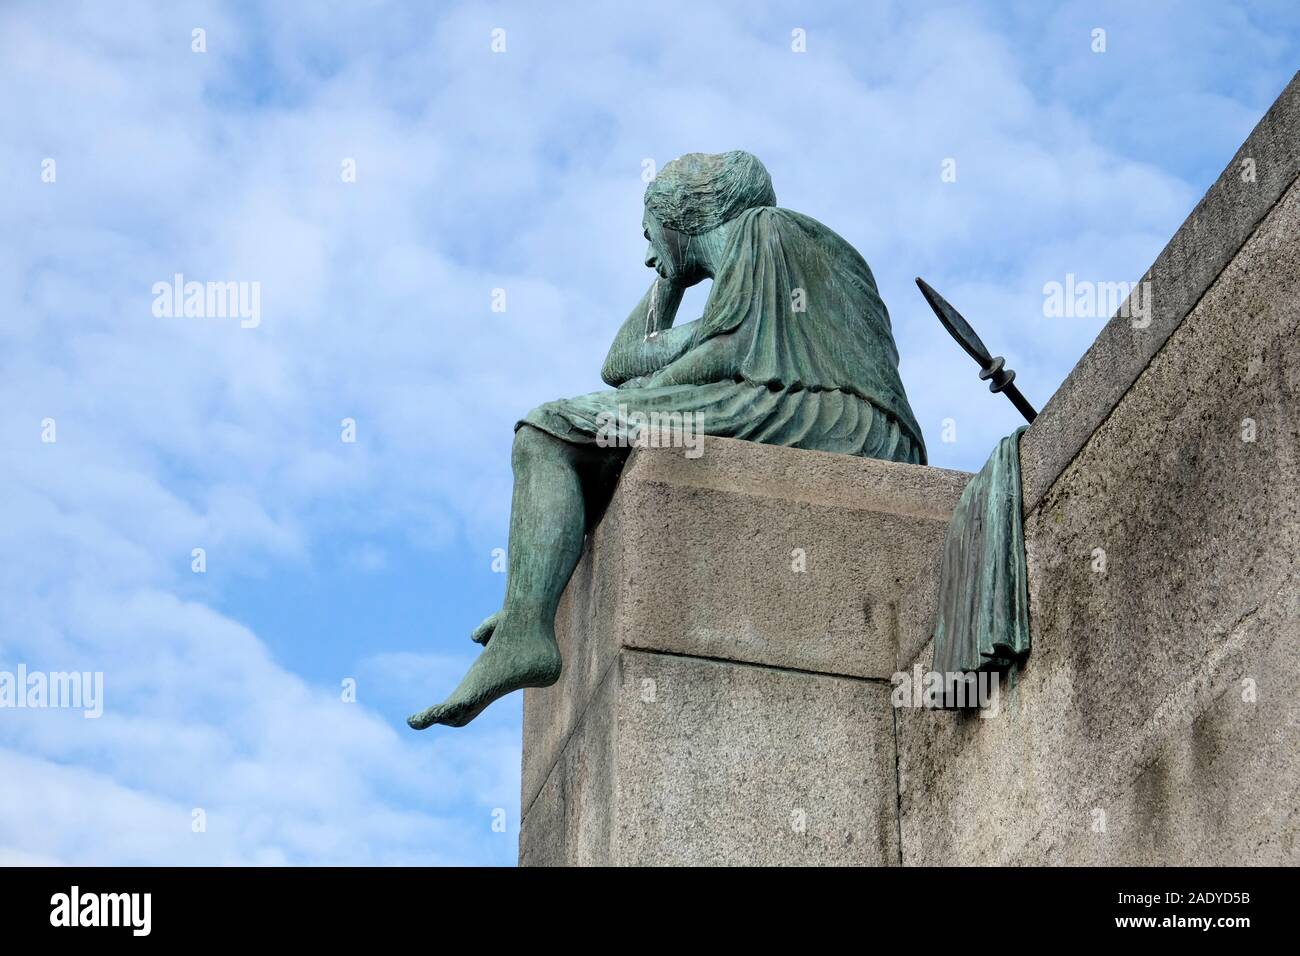 A view of Helvetia statue in Basel, Switzerland Stock Photo